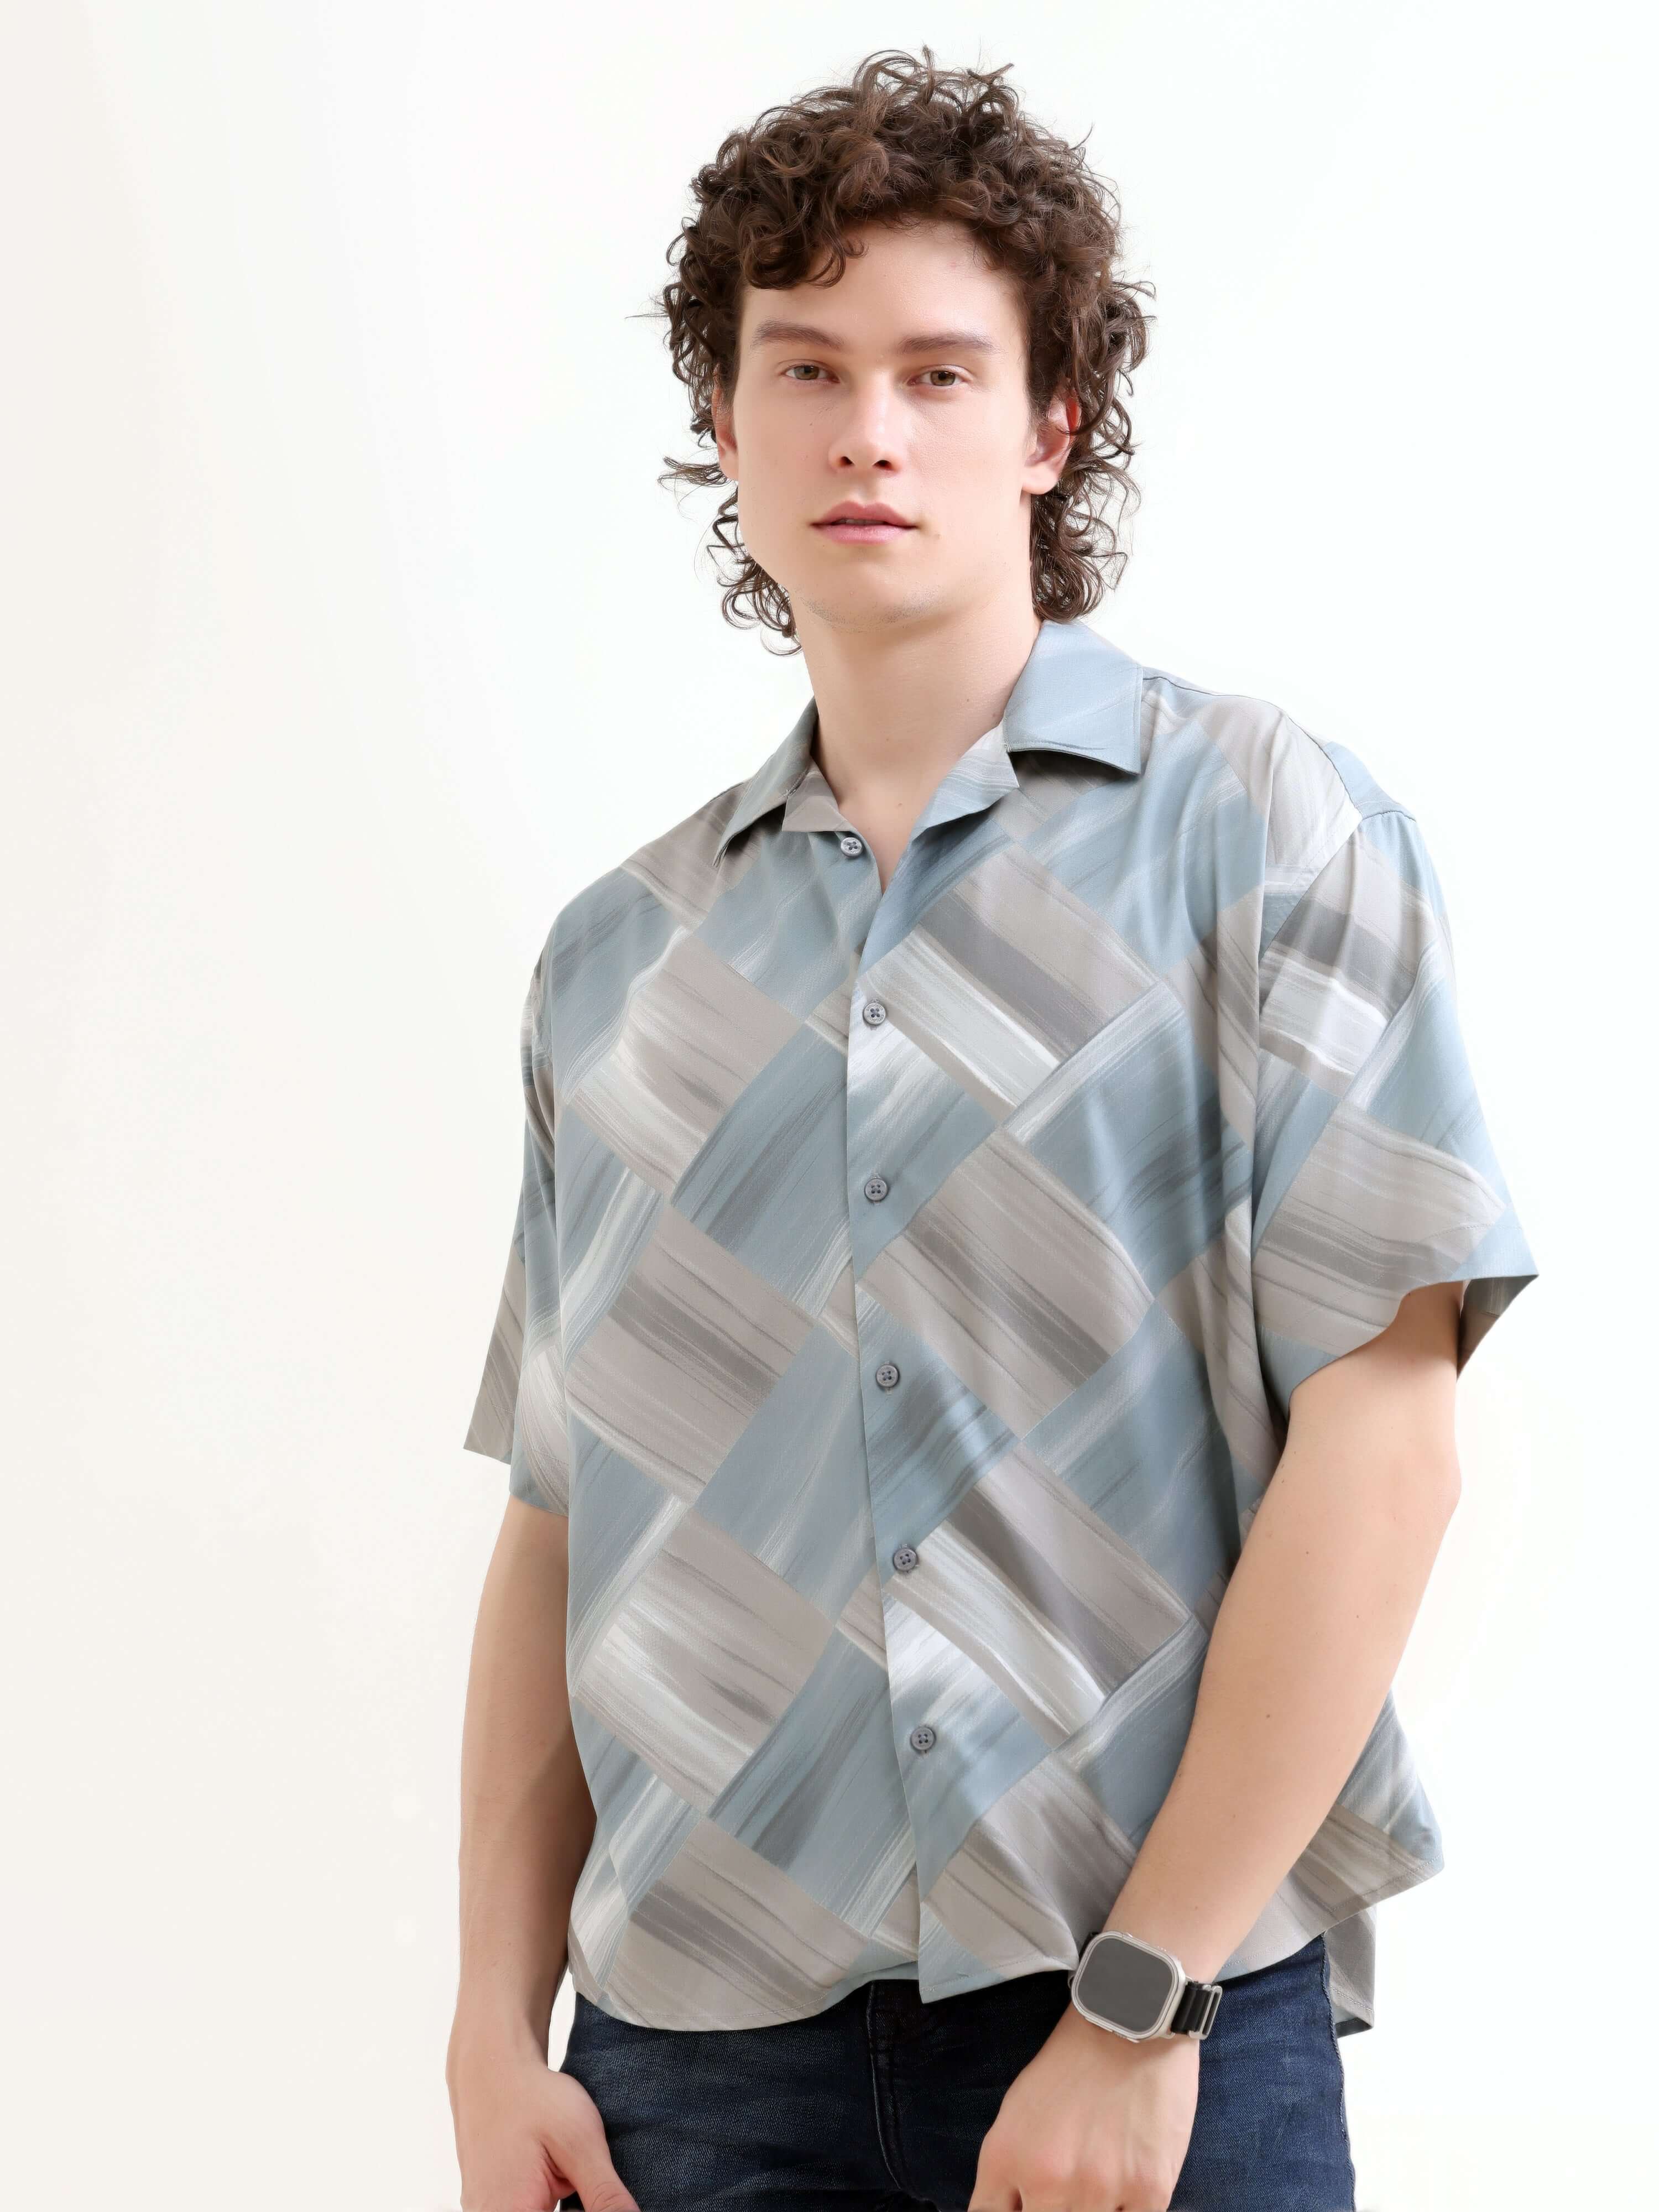 Men's Teal Oversized Shirt - Summer Streetwear Essential shop online at Estilocus. Elevate your summer look with our Minos teal oversized shirt. Perfect for a relaxed Hawaiian vibe and new arrivals in men's casual fashion.